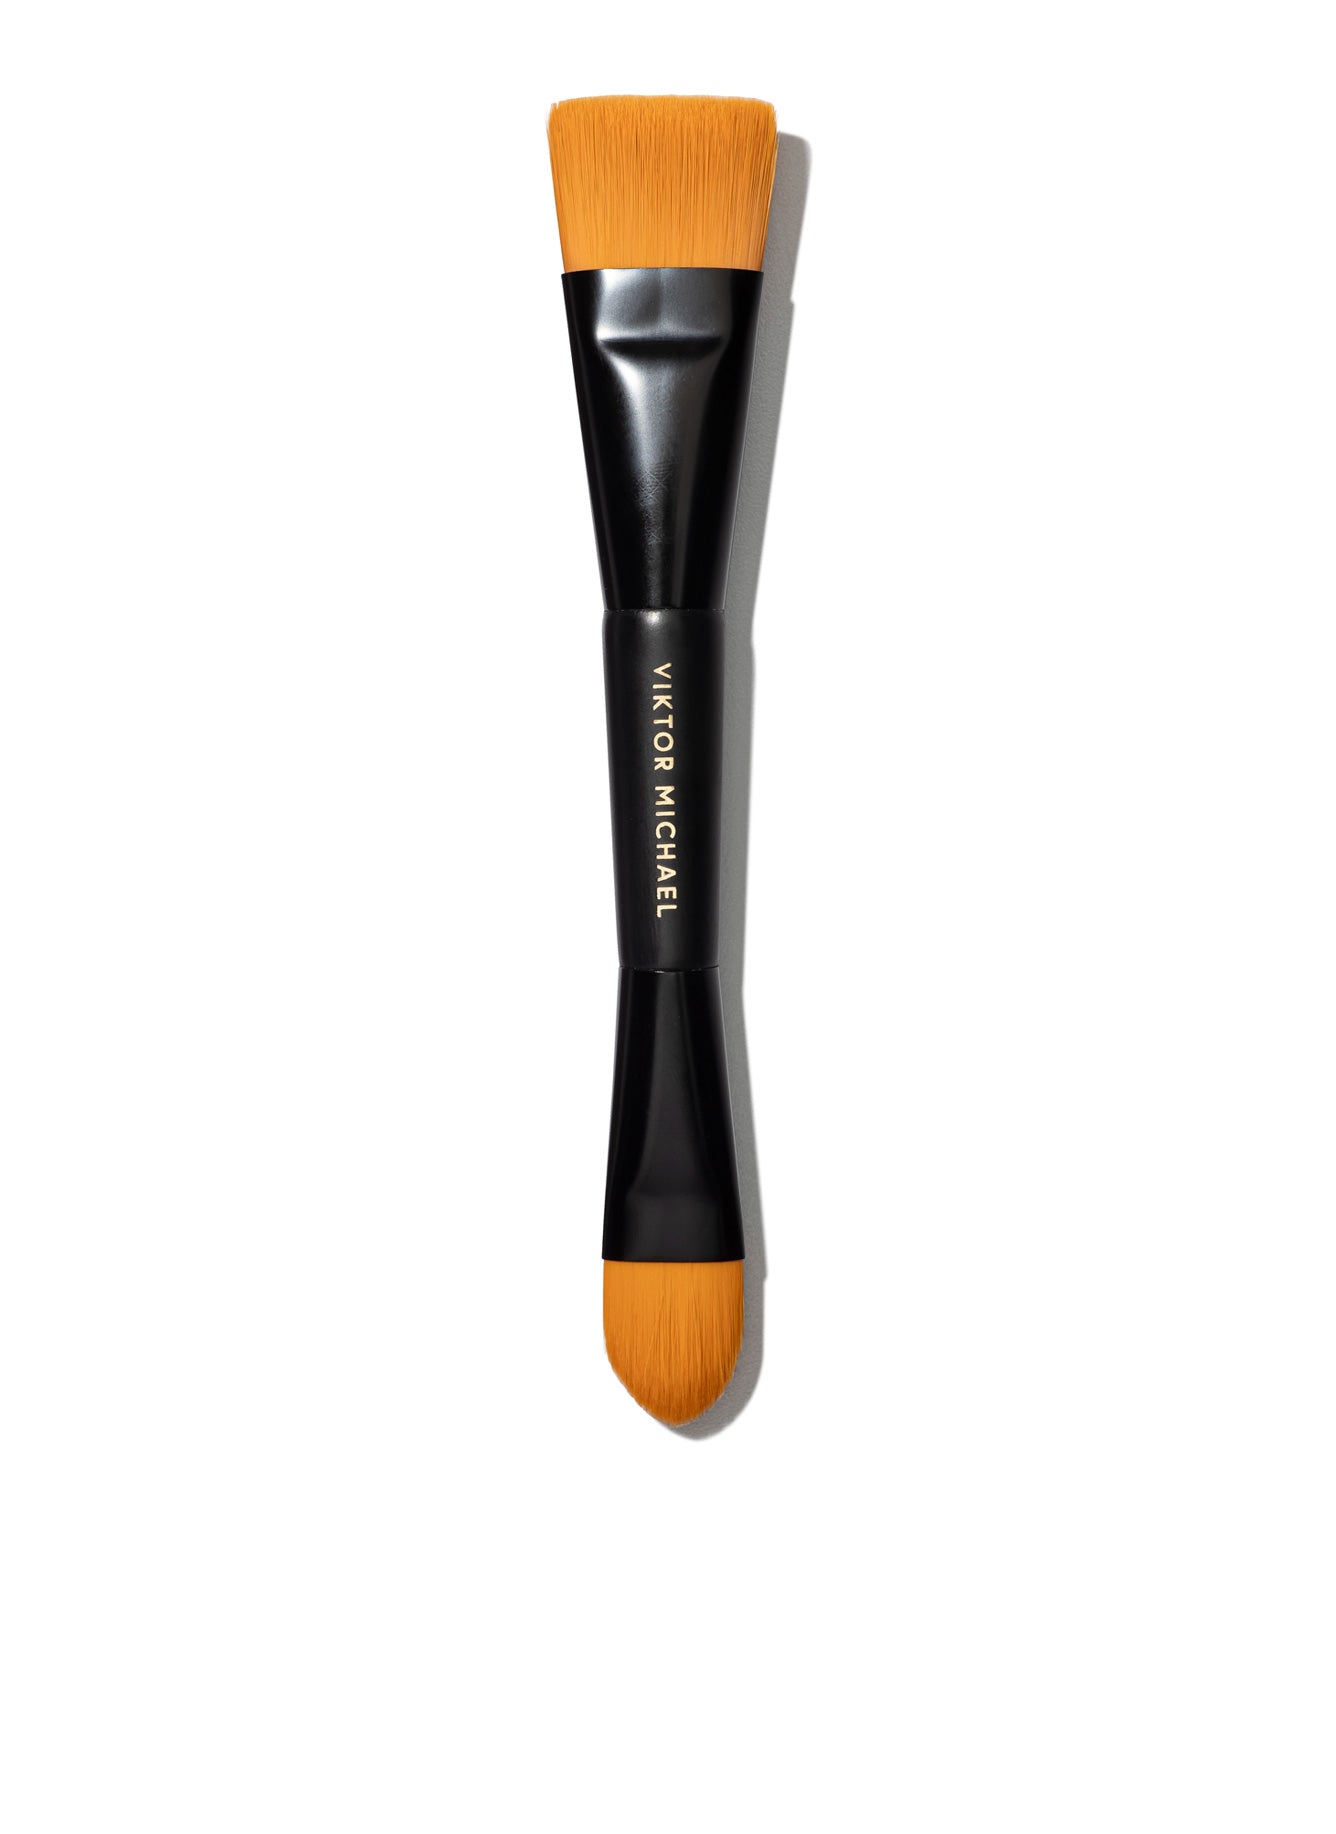 HEAL & CONCEAL double ended brush from Viktor Michael